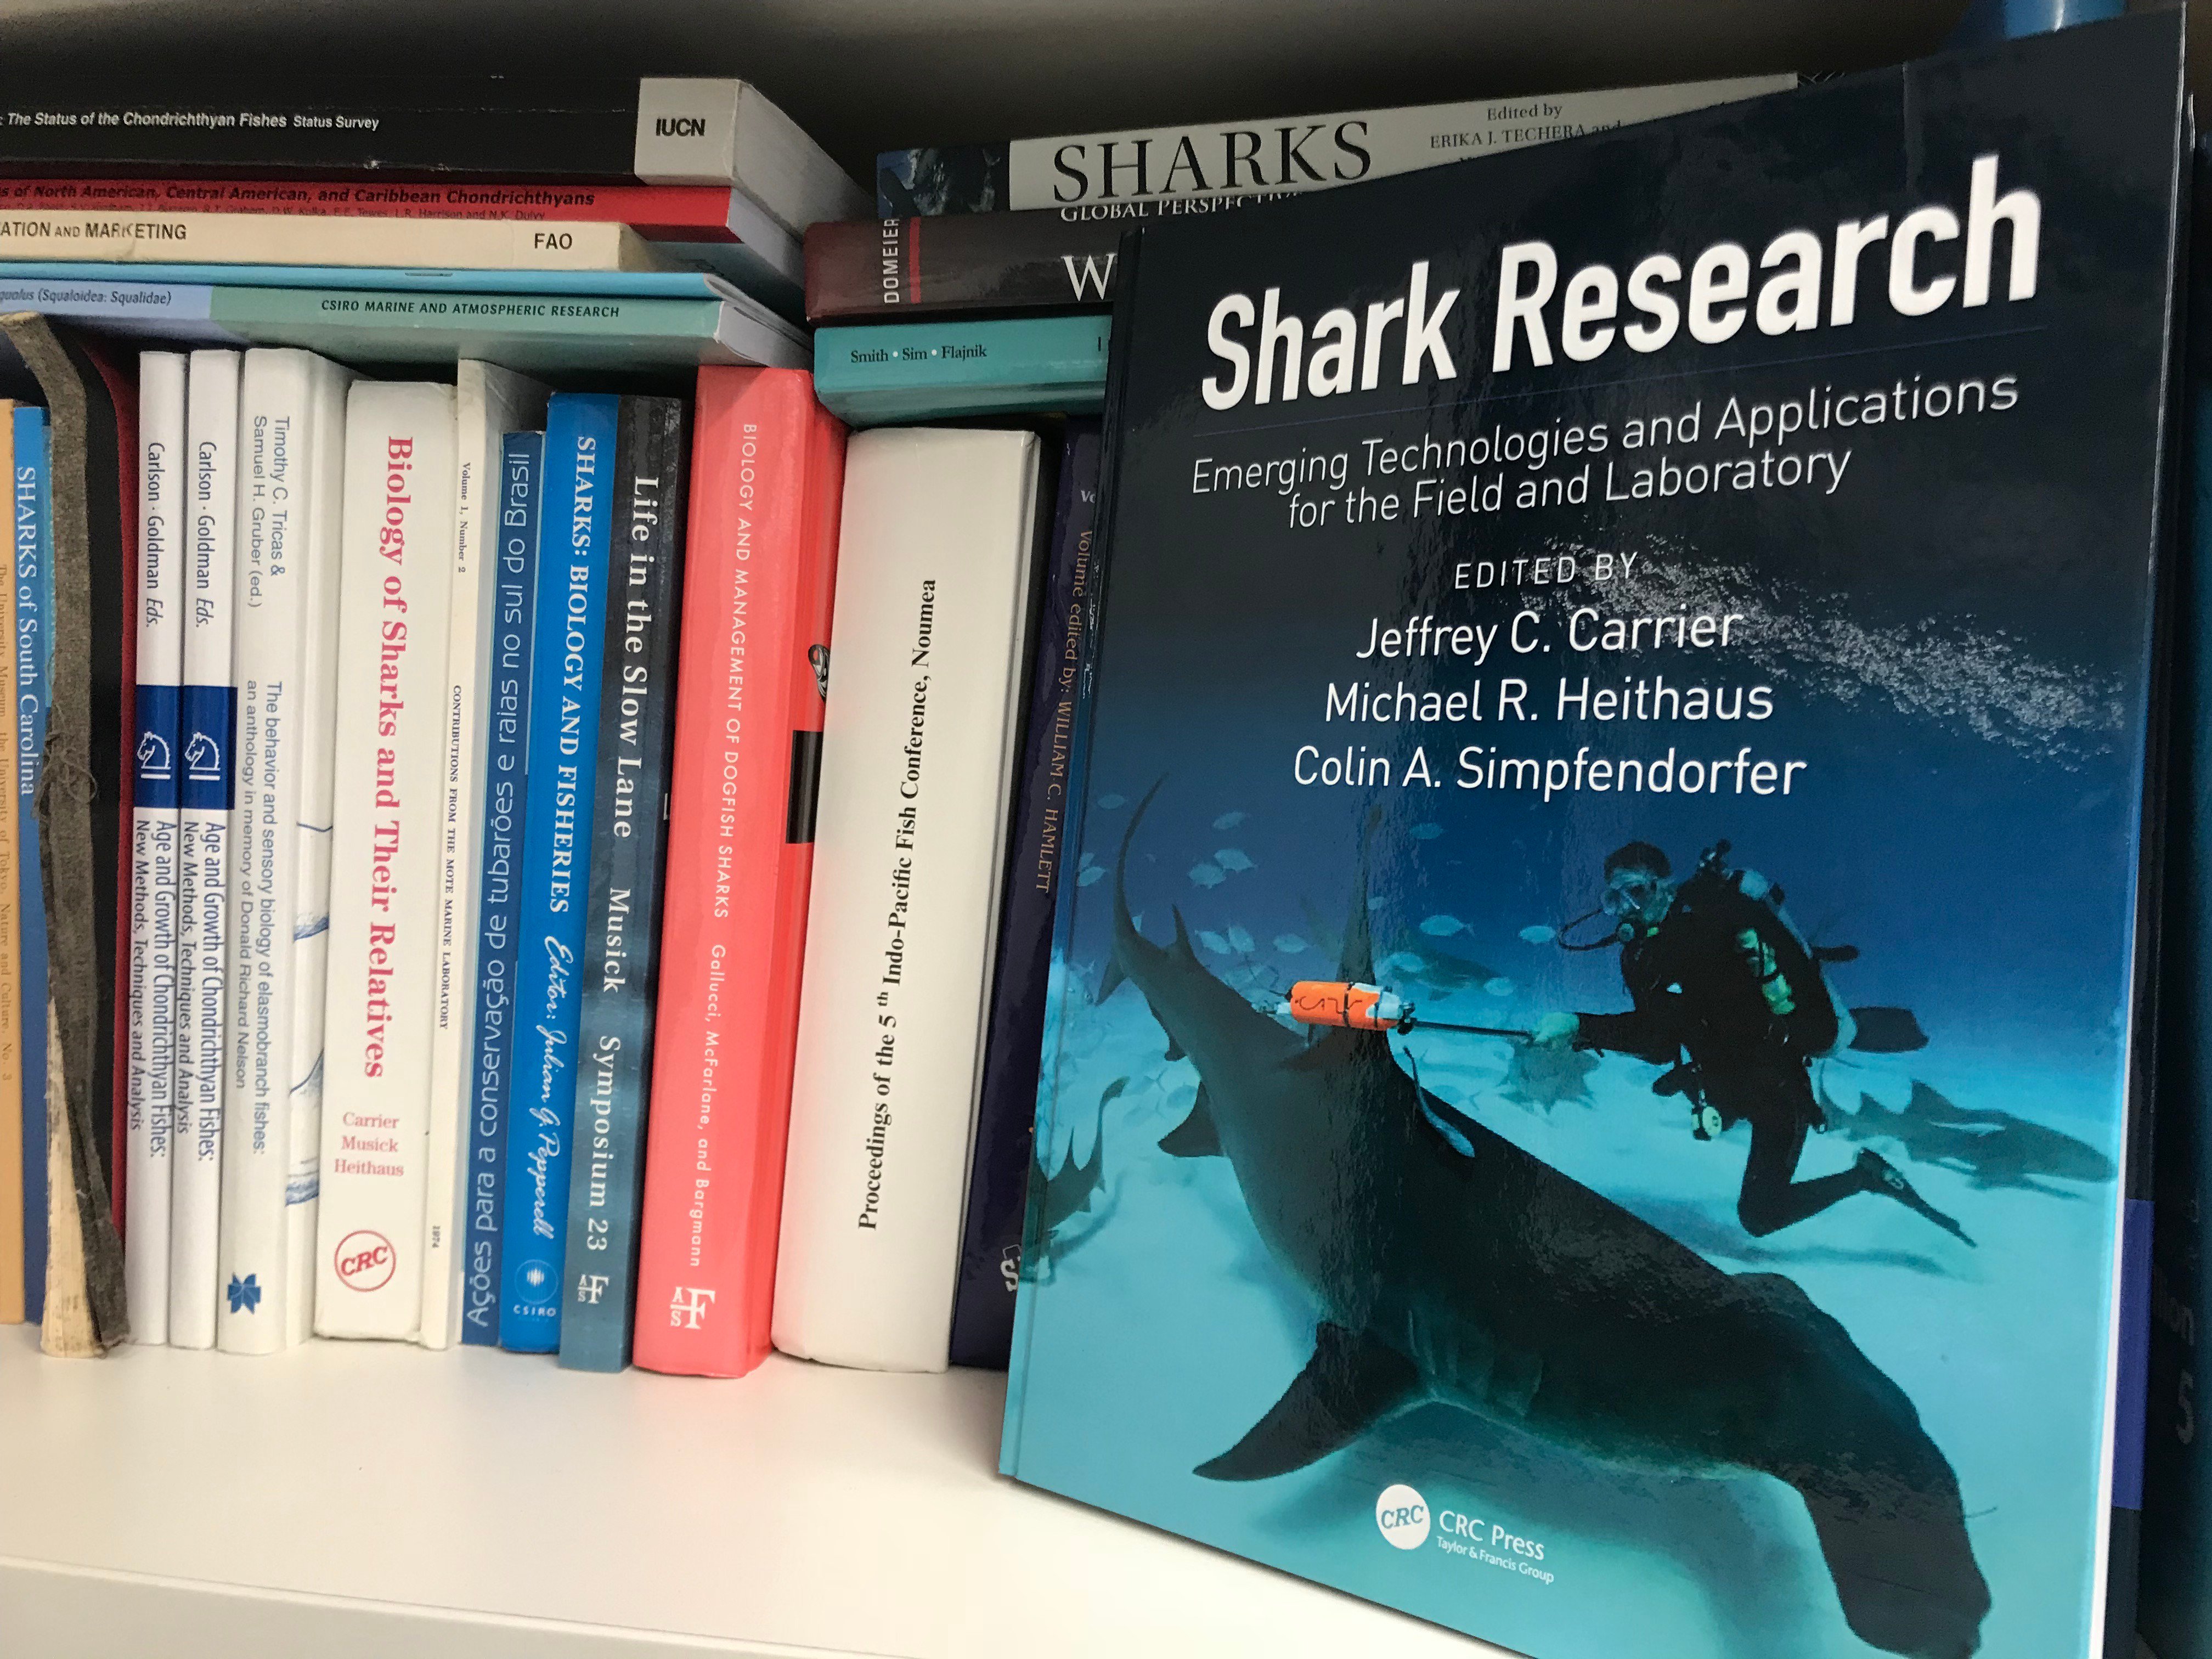 Emerging Technologies and Applications for the Field and Laboratory Shark Research 